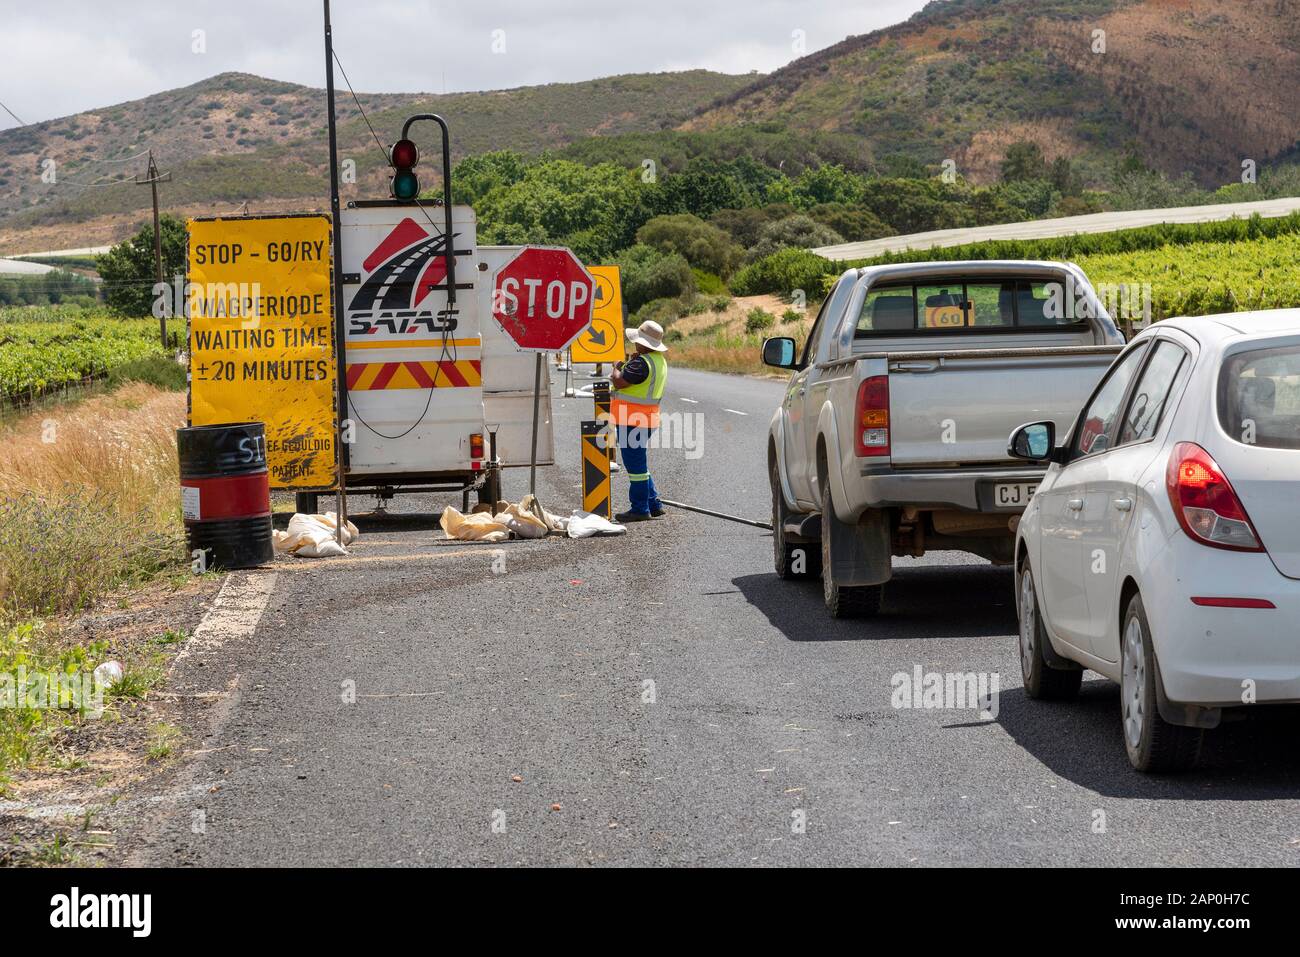 Riebeek West, South Africa. December 2019. Traffic control with stop go board controls traffic on a busy highway in the Western cape, South Africa. Stock Photo